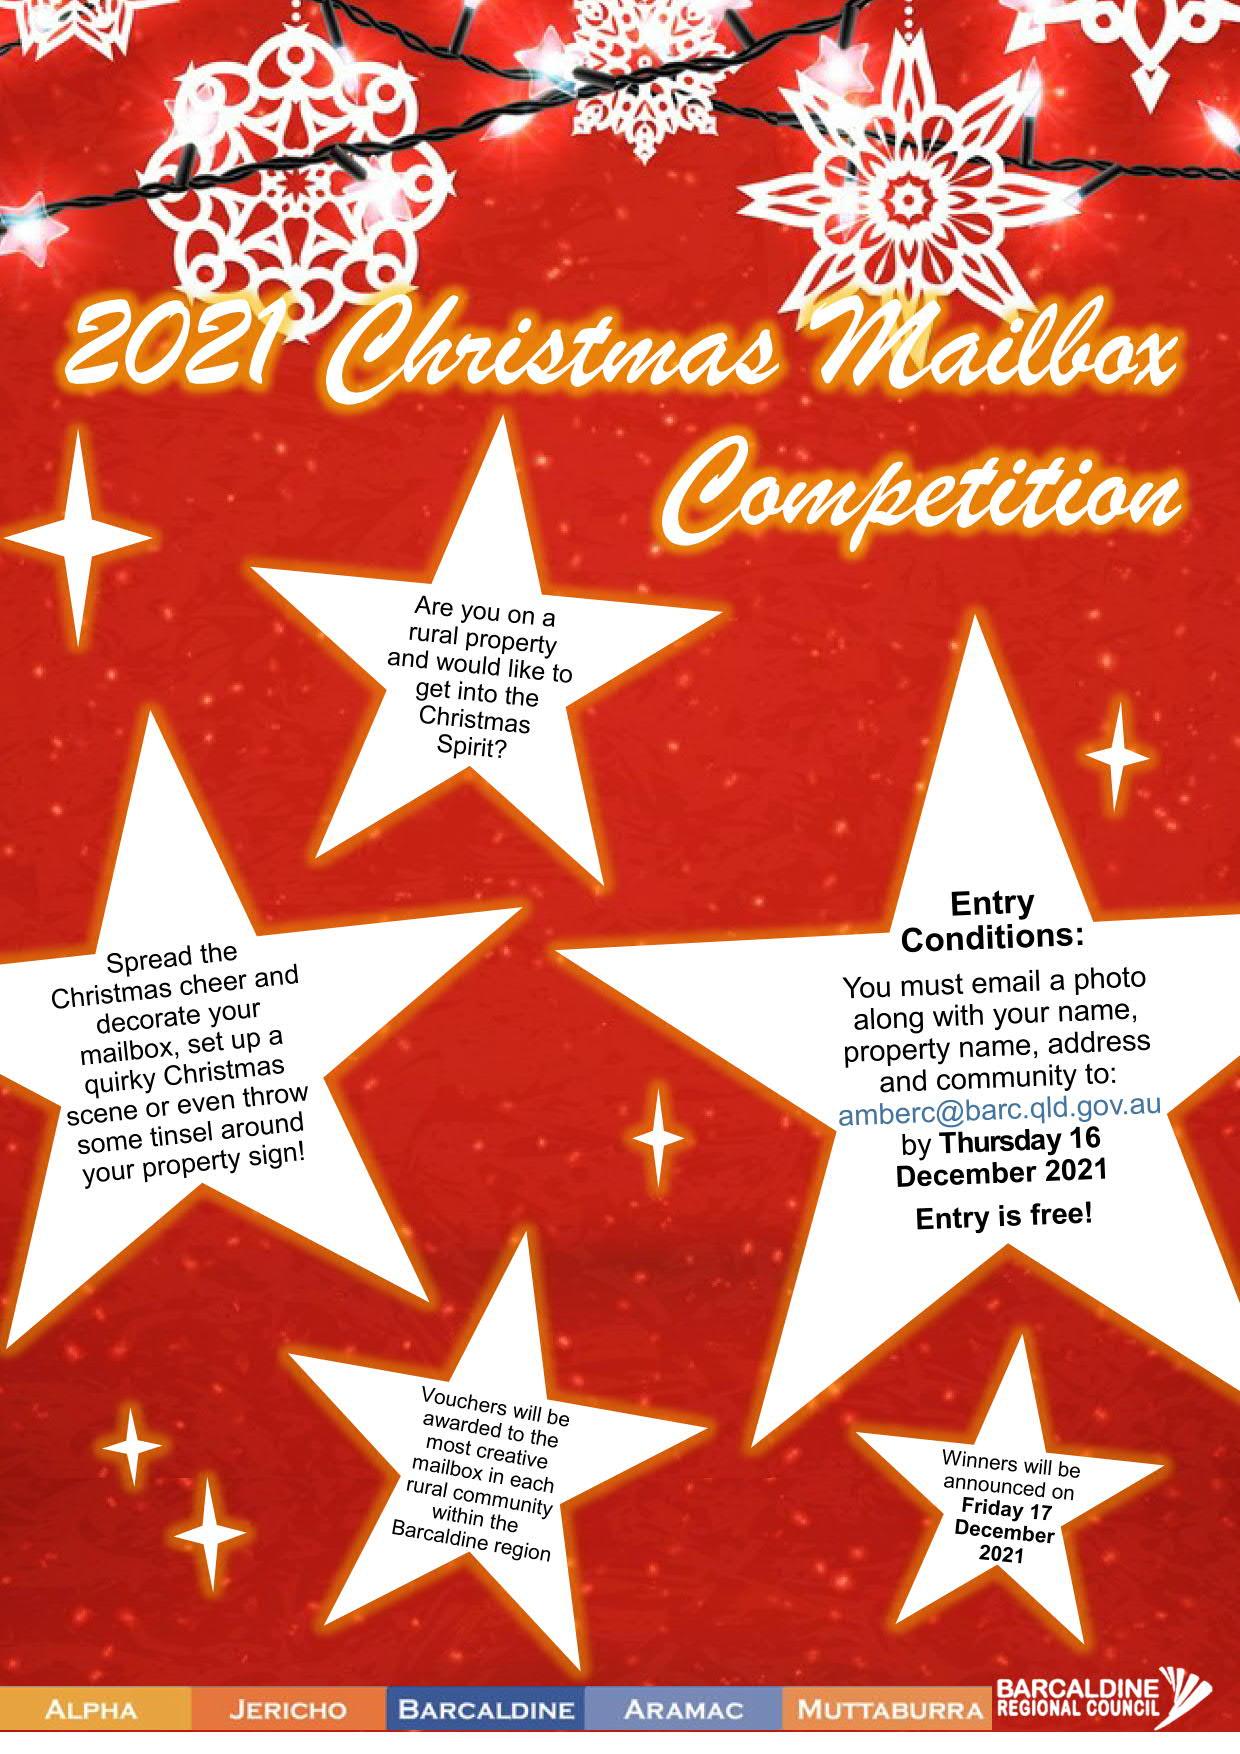 2021 Christmas Mailbox Competition, December 2021